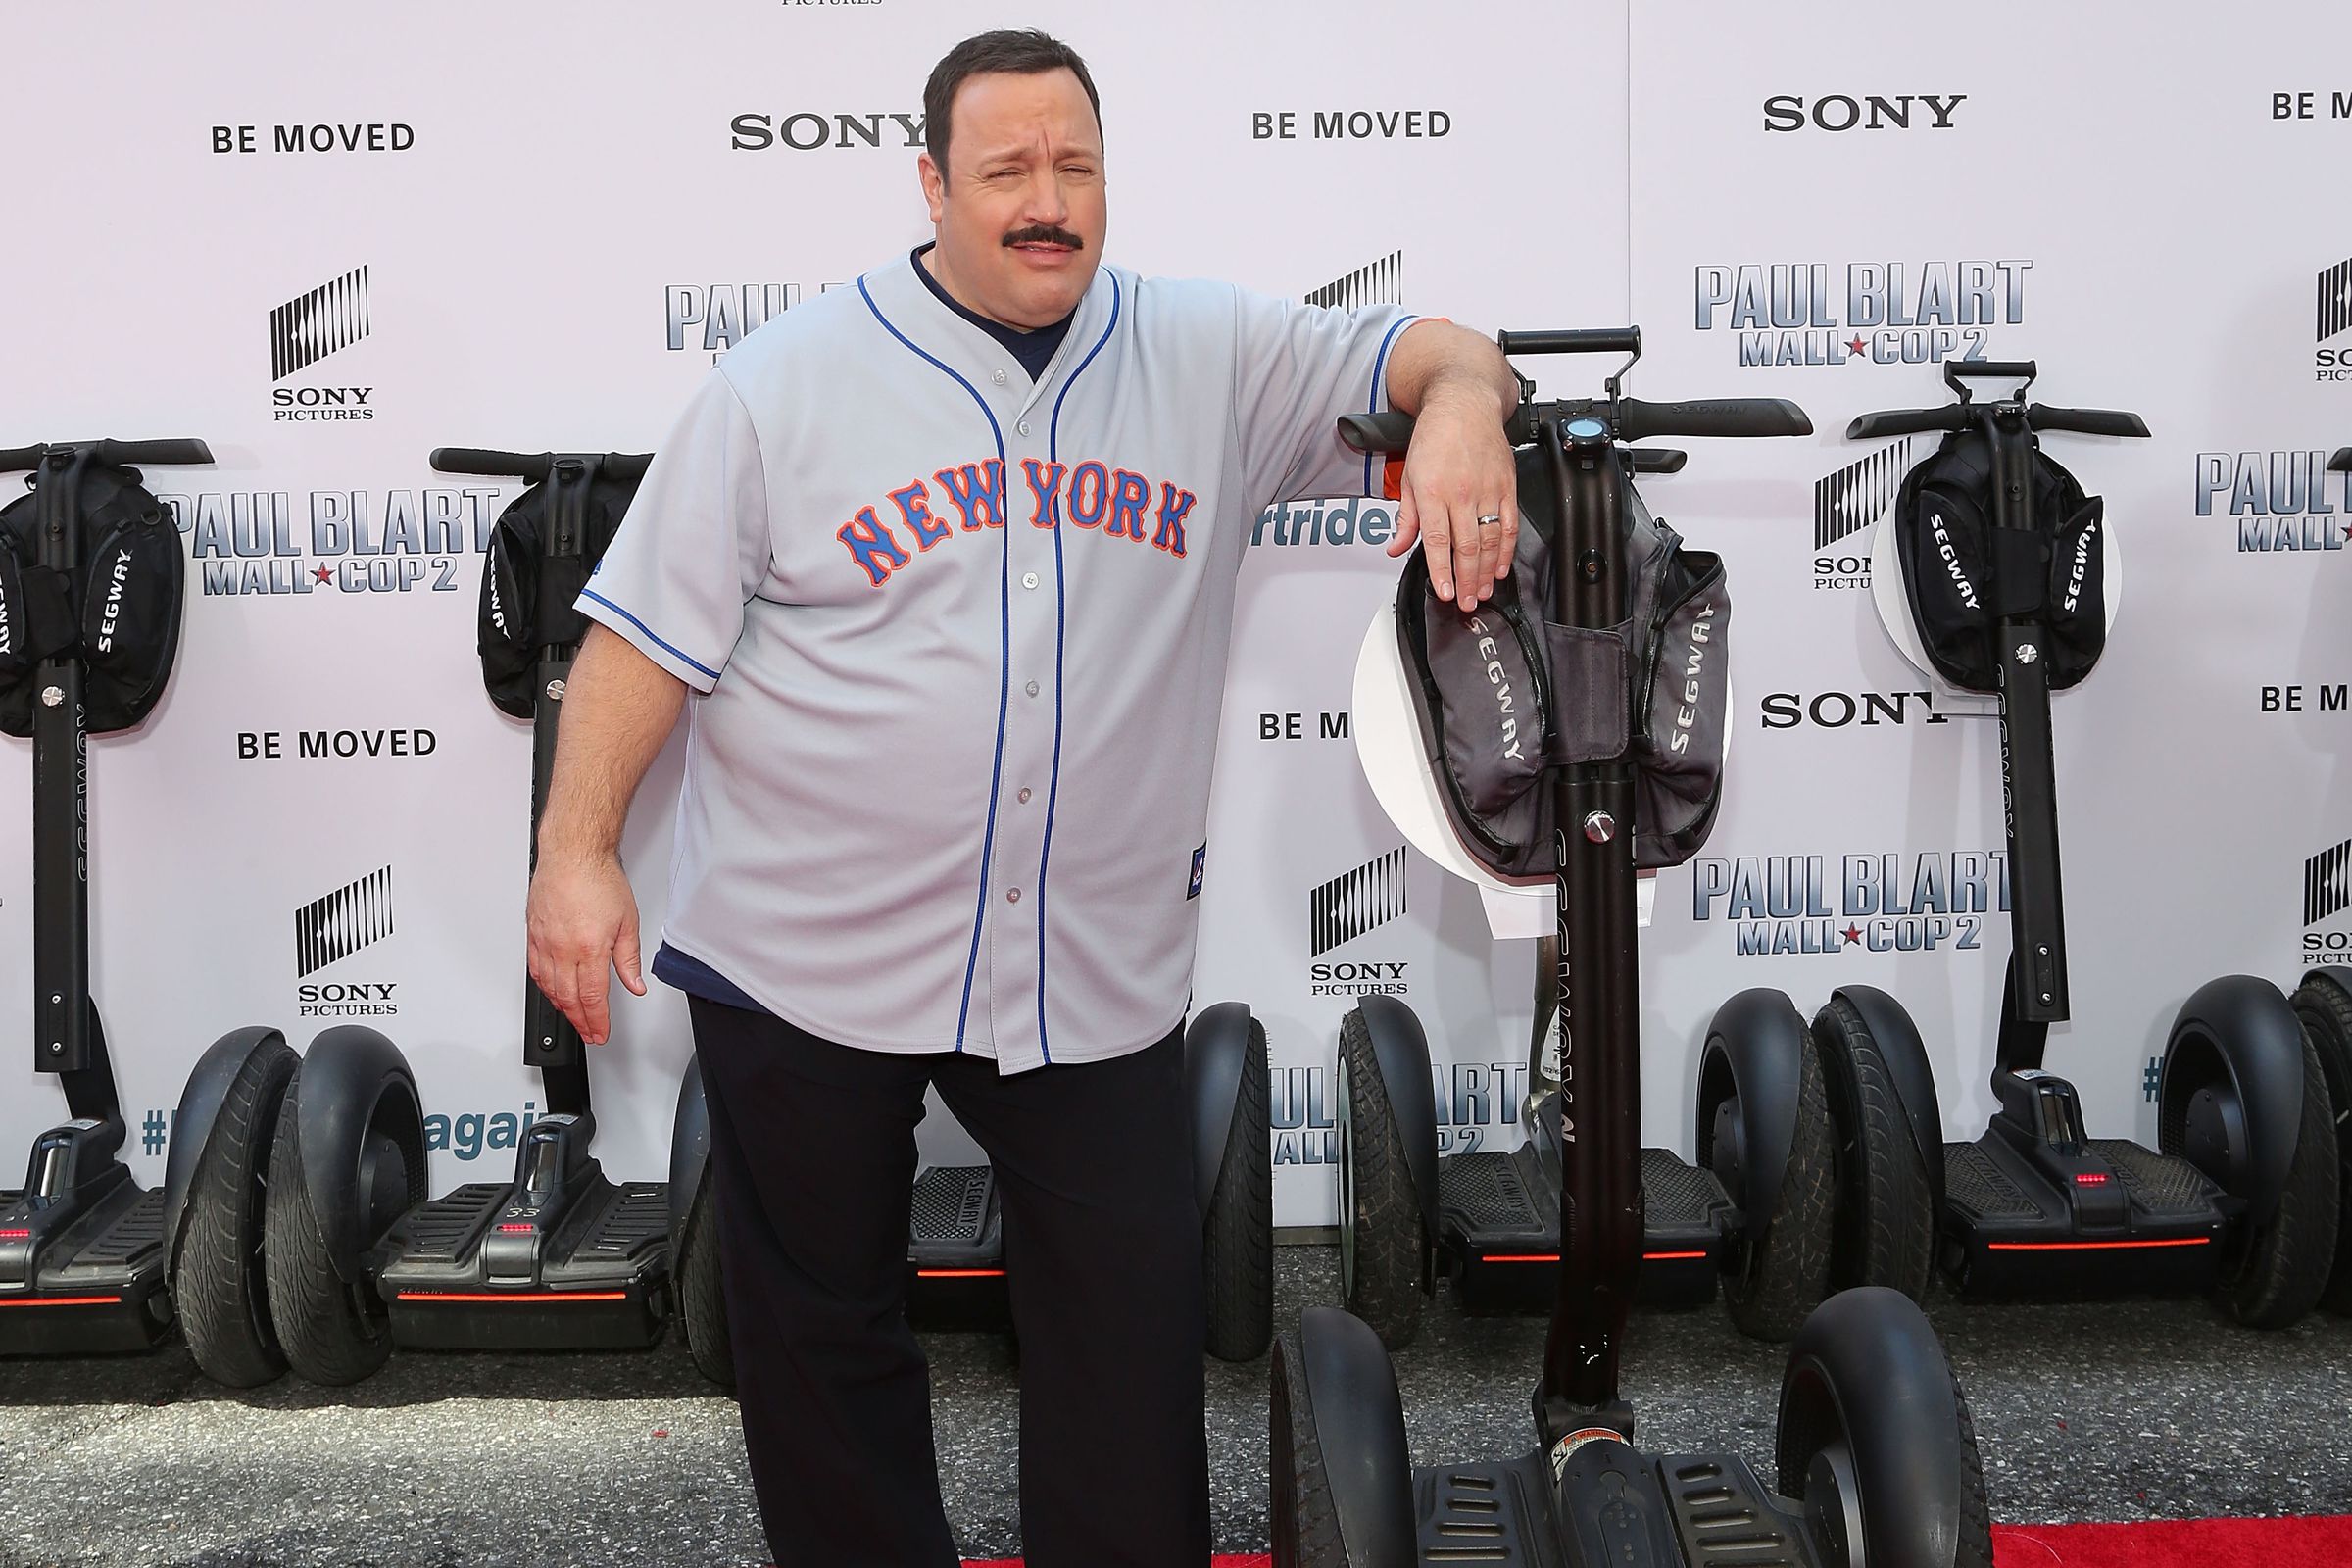 “Paul Blart: Mall Cop 2” New York Premiere - For The Wrap